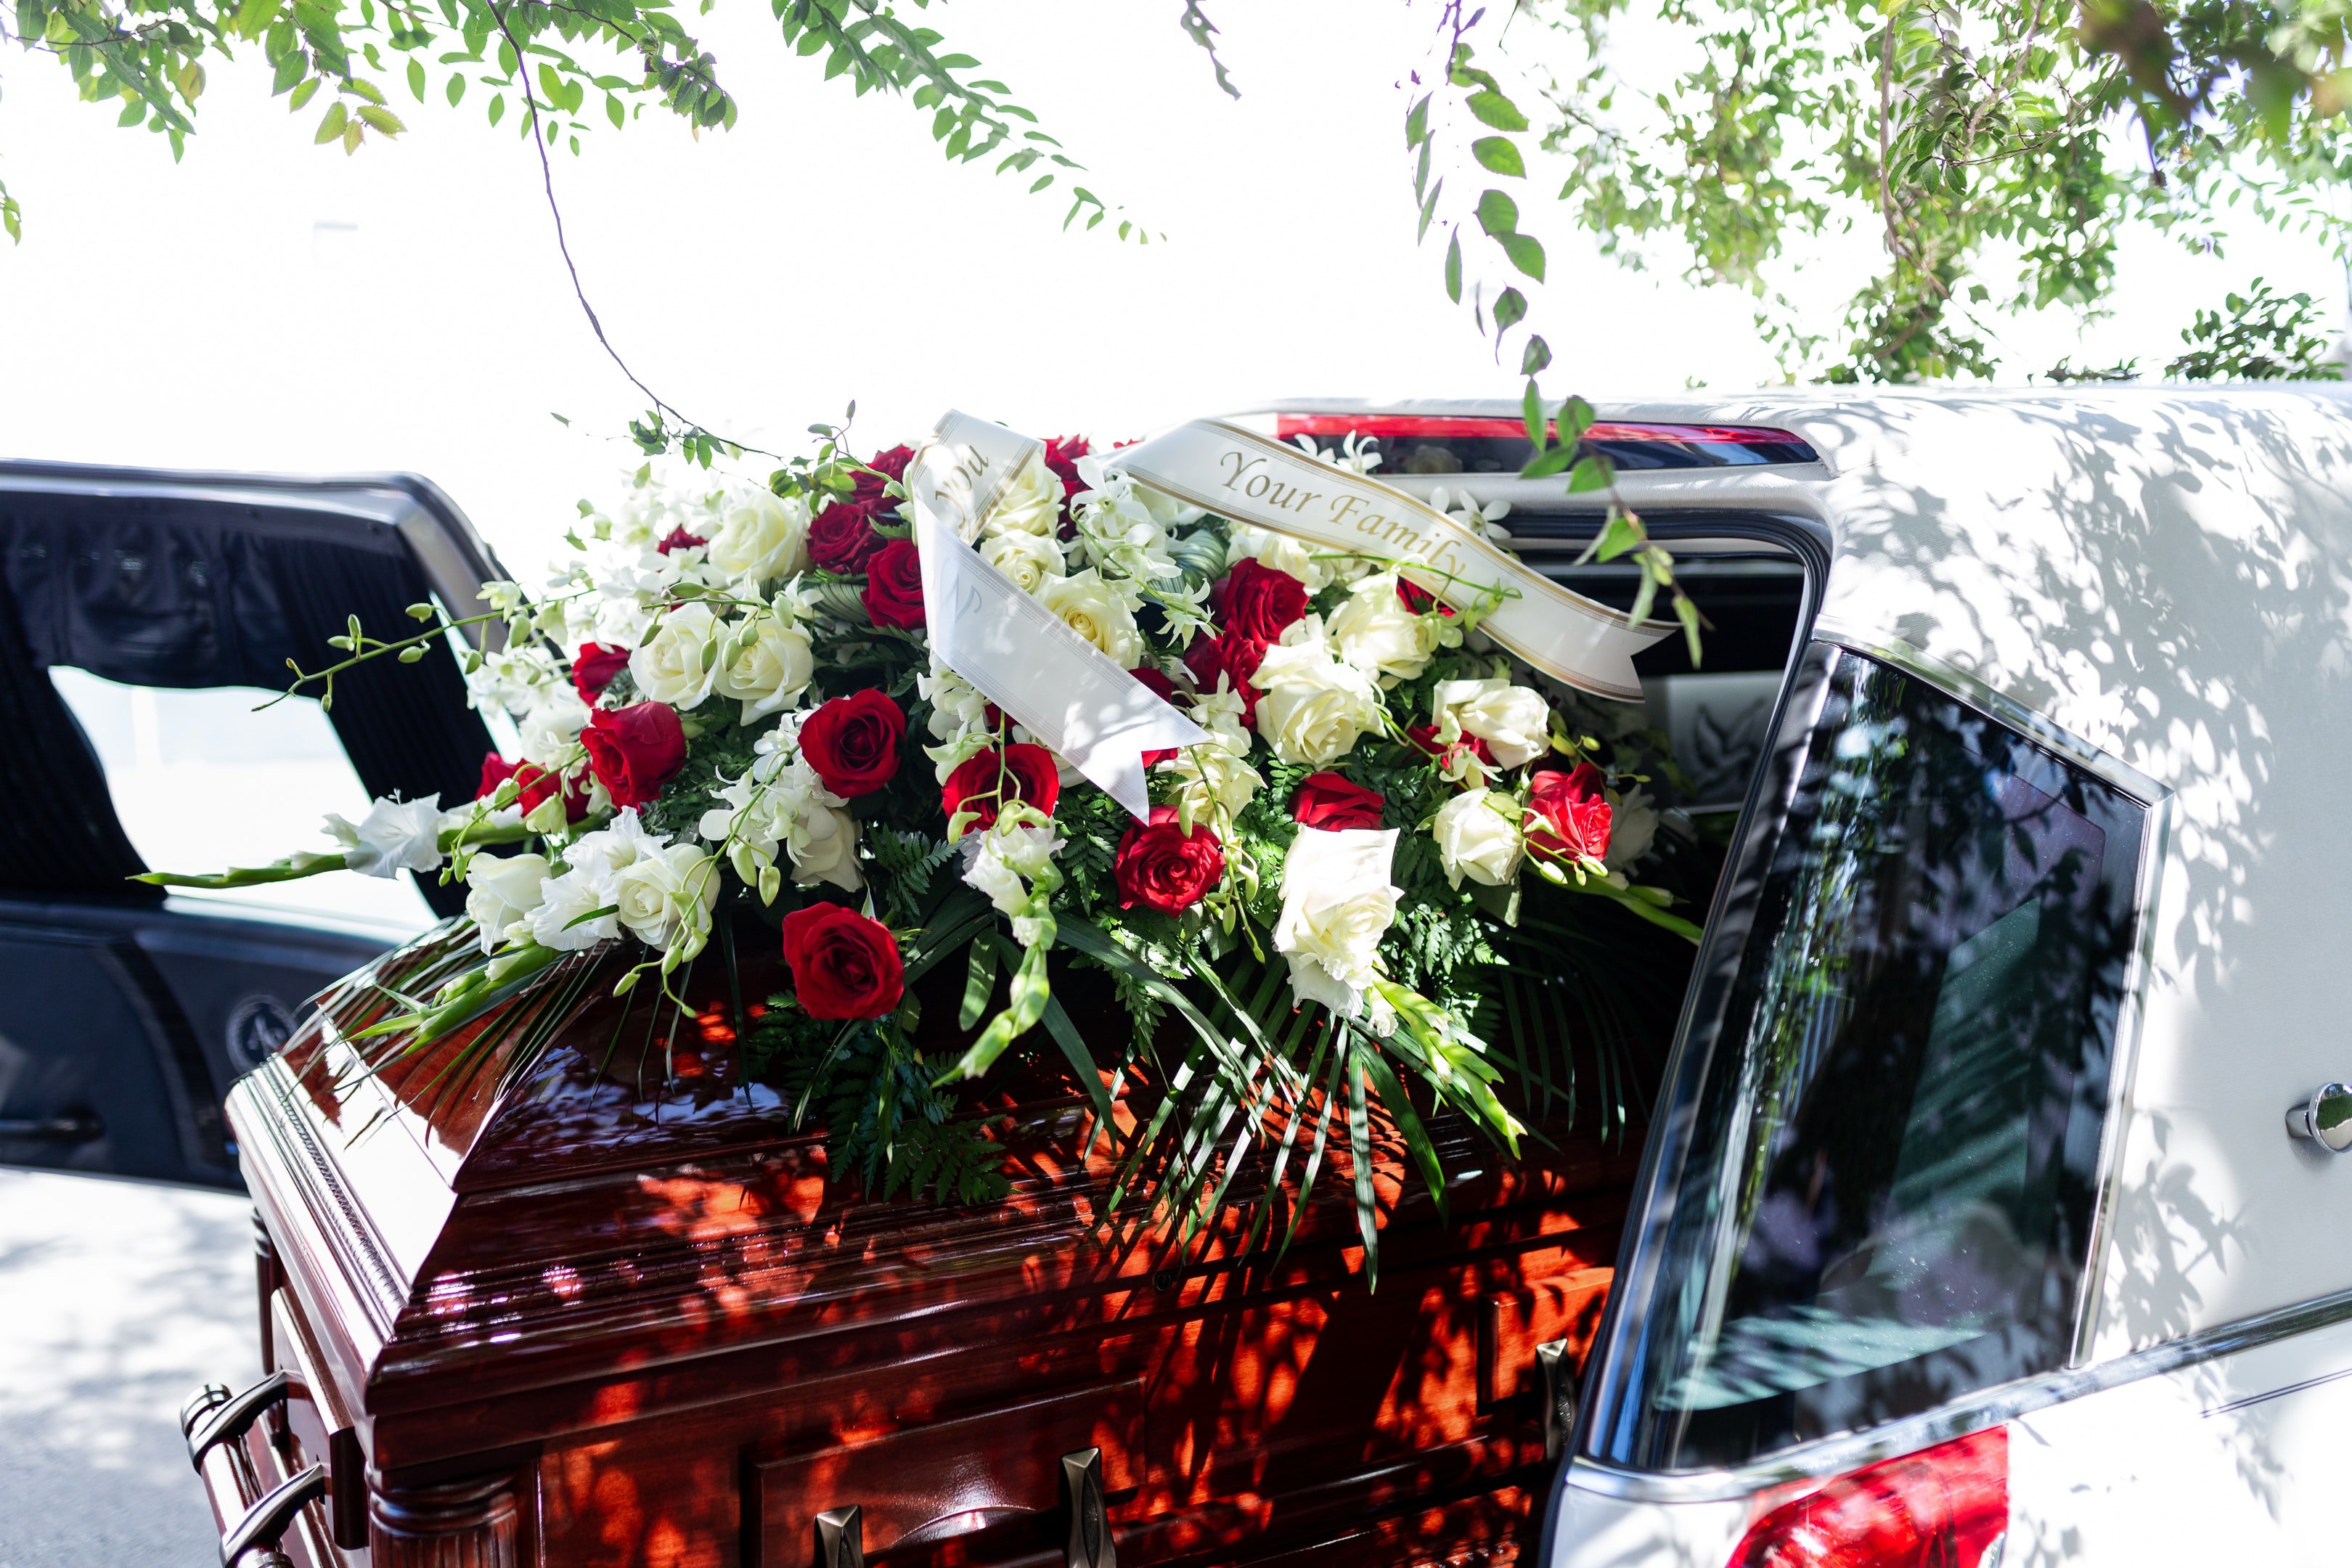 A coffin with flowers in top of it  | Source: Unsplash